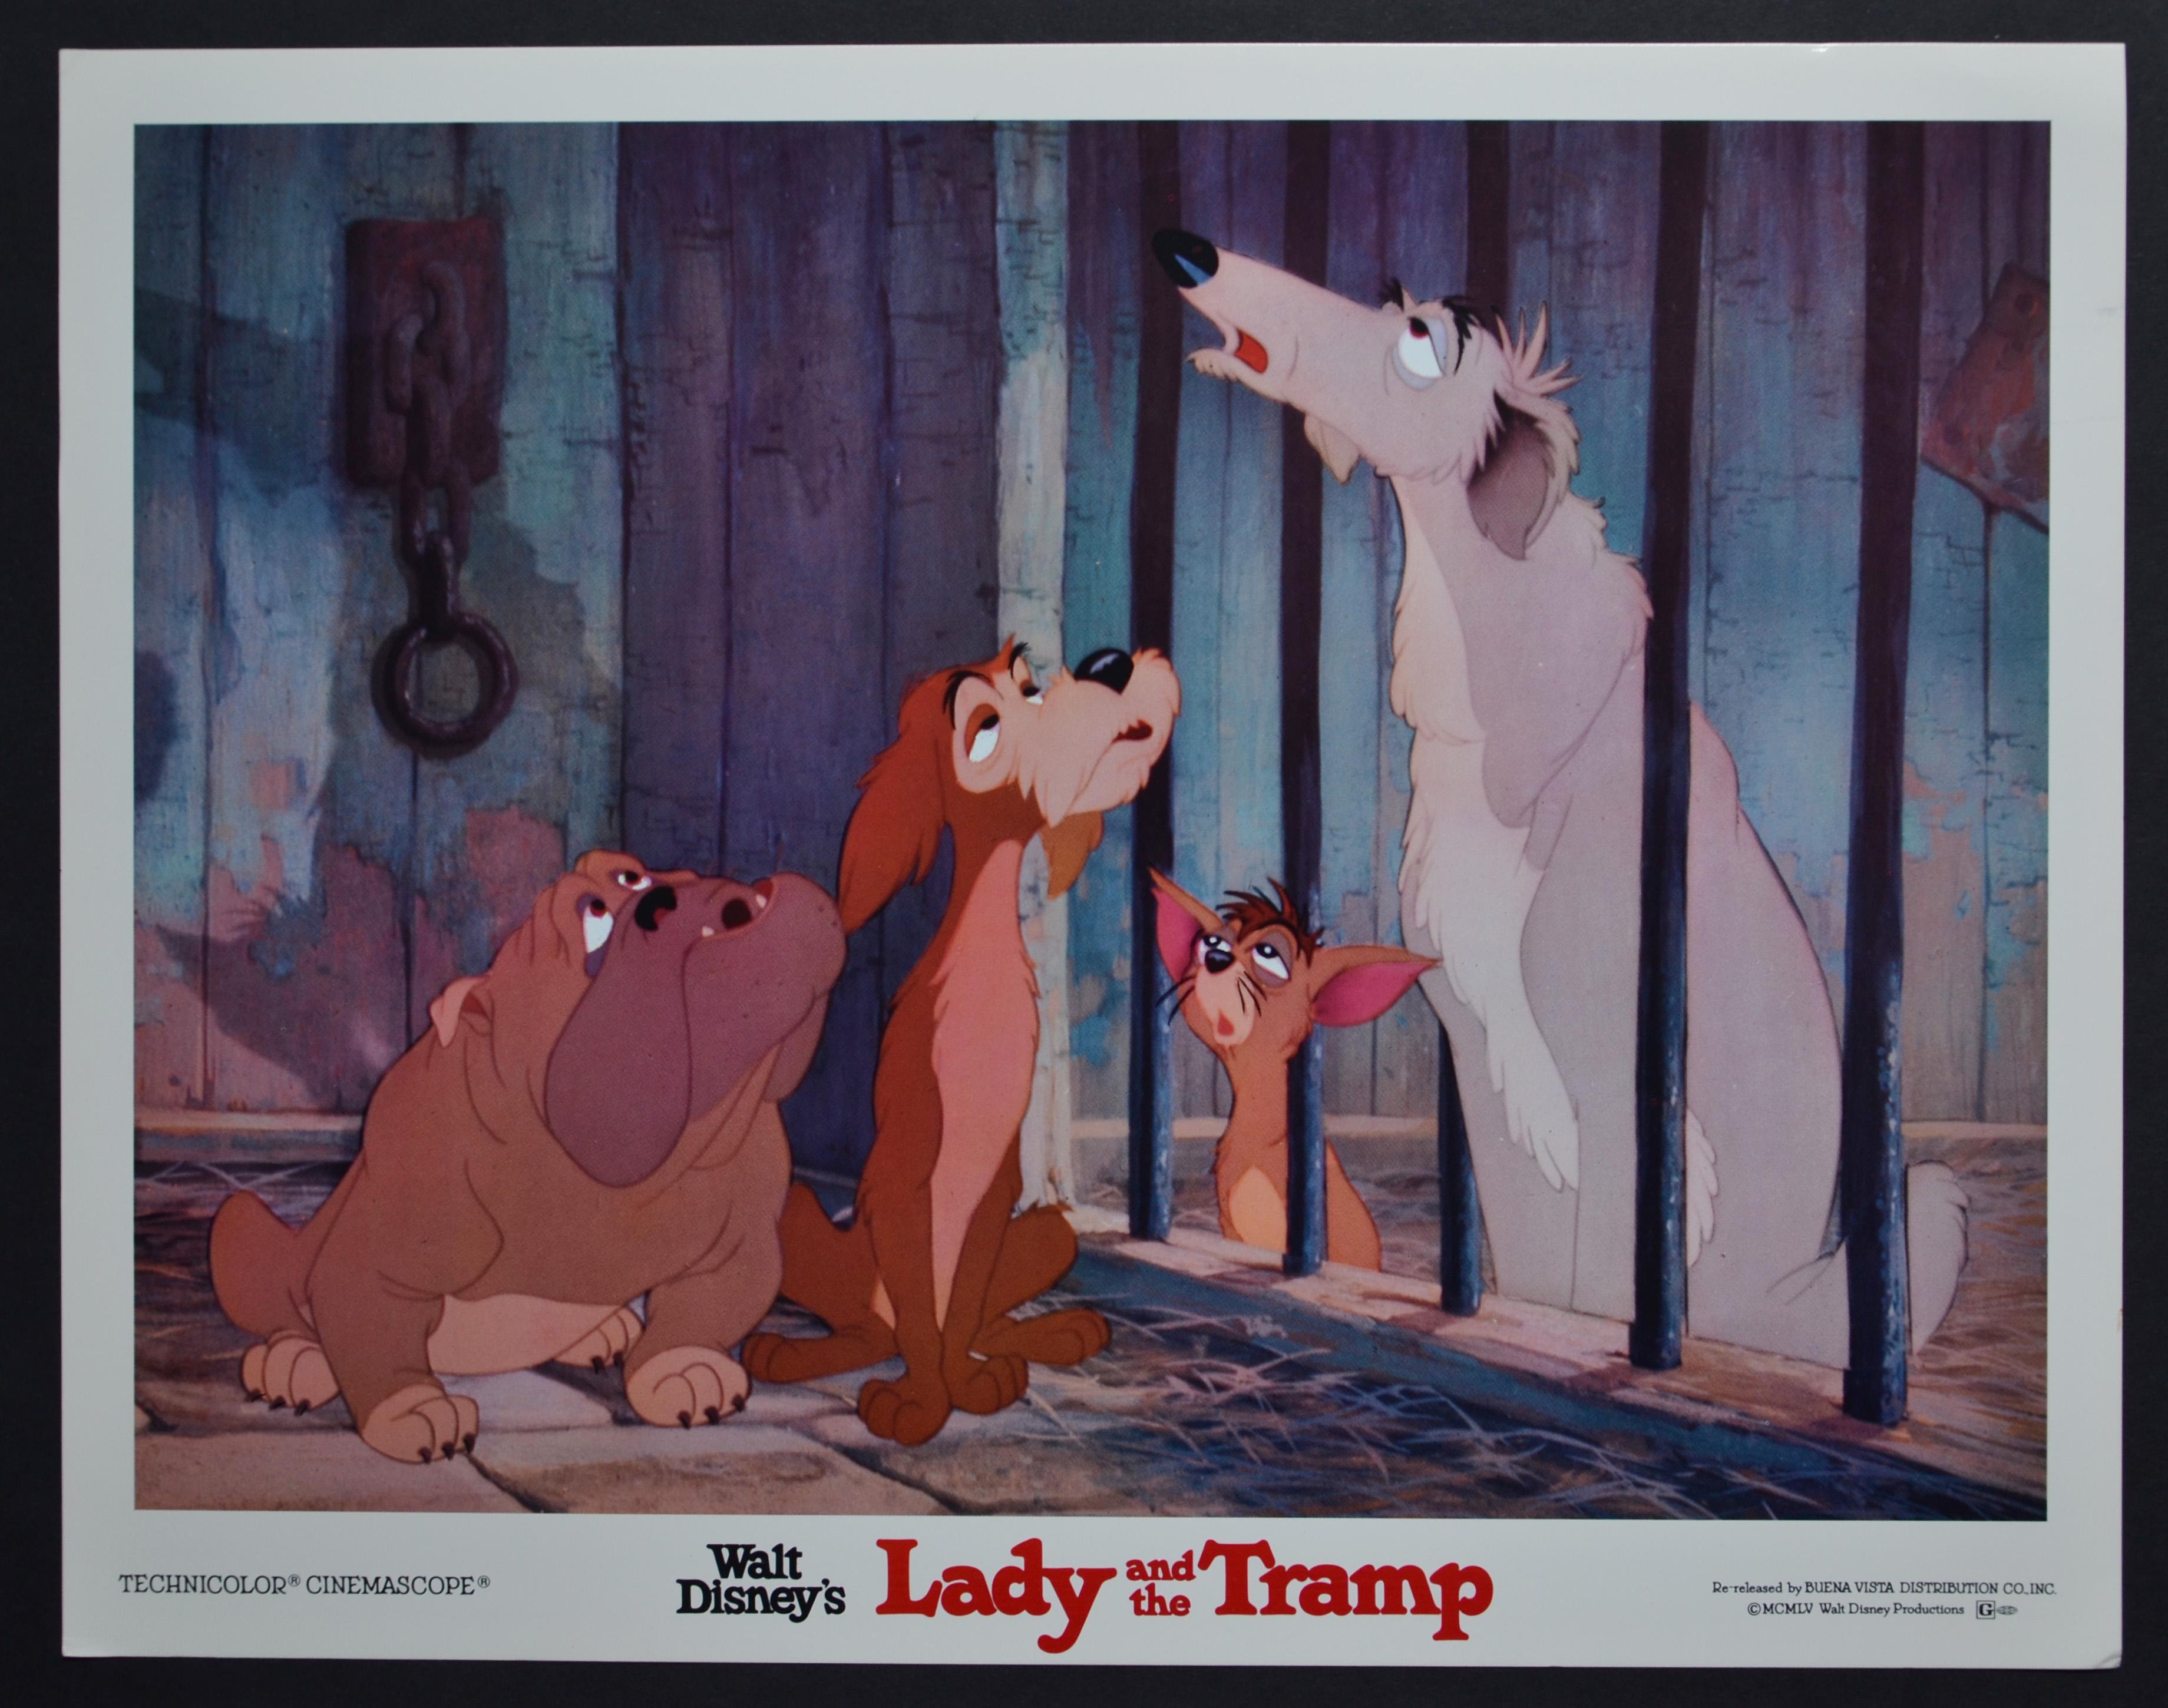 Unknown Interior Print - „Lady and the Tramp“, Lobby Card of Walt Disney’s Movie, USA 1955.